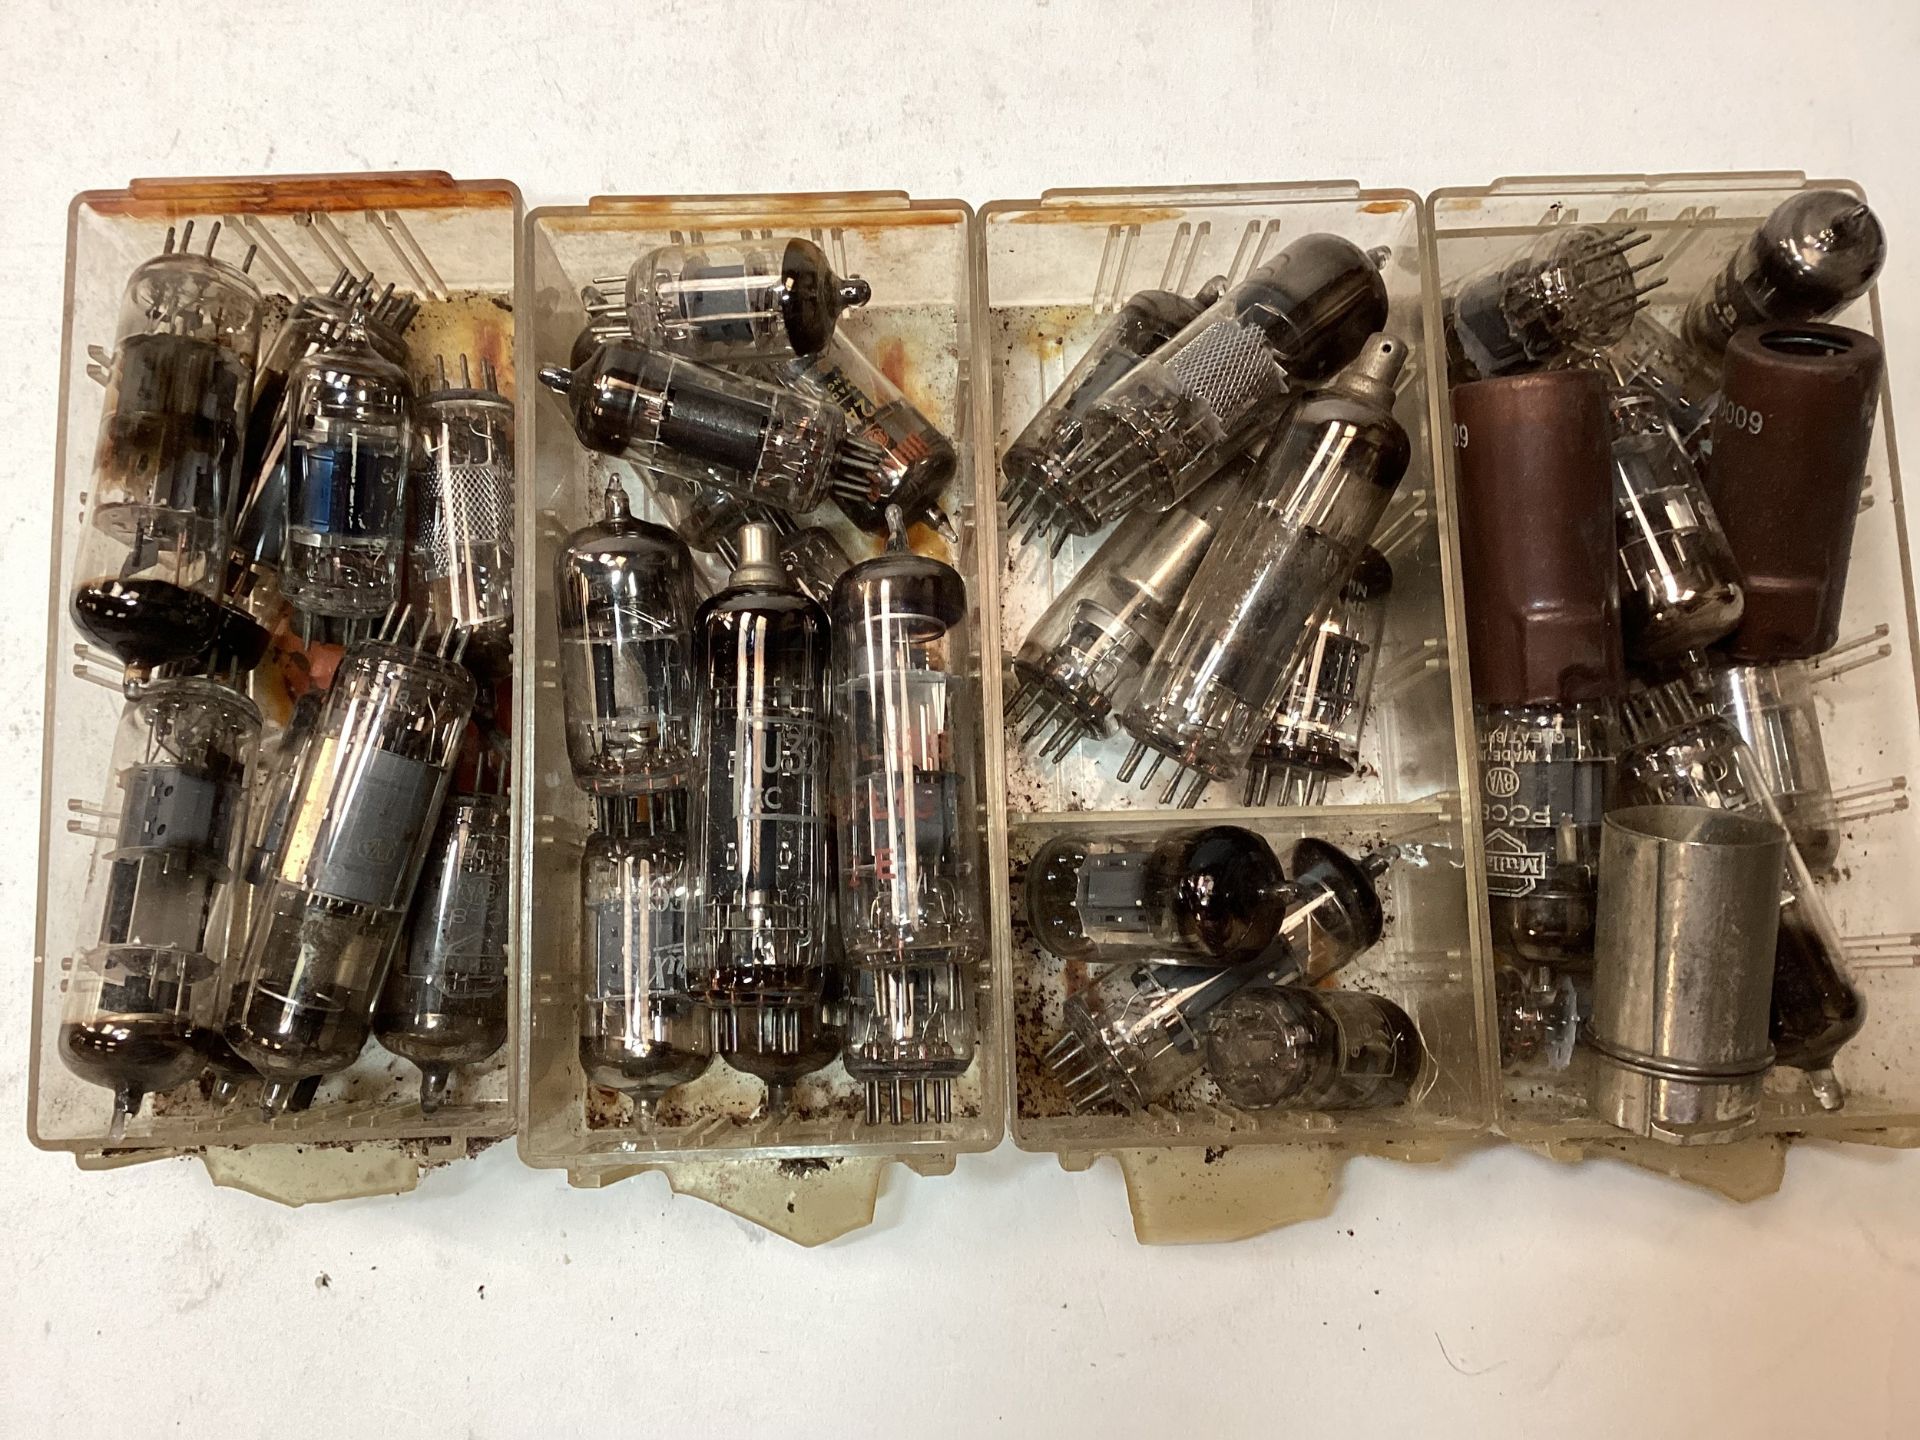 LARGE BOX OF VARIOUS VALVES. A very mixed selection of used valves found here in various conditions. - Image 3 of 3